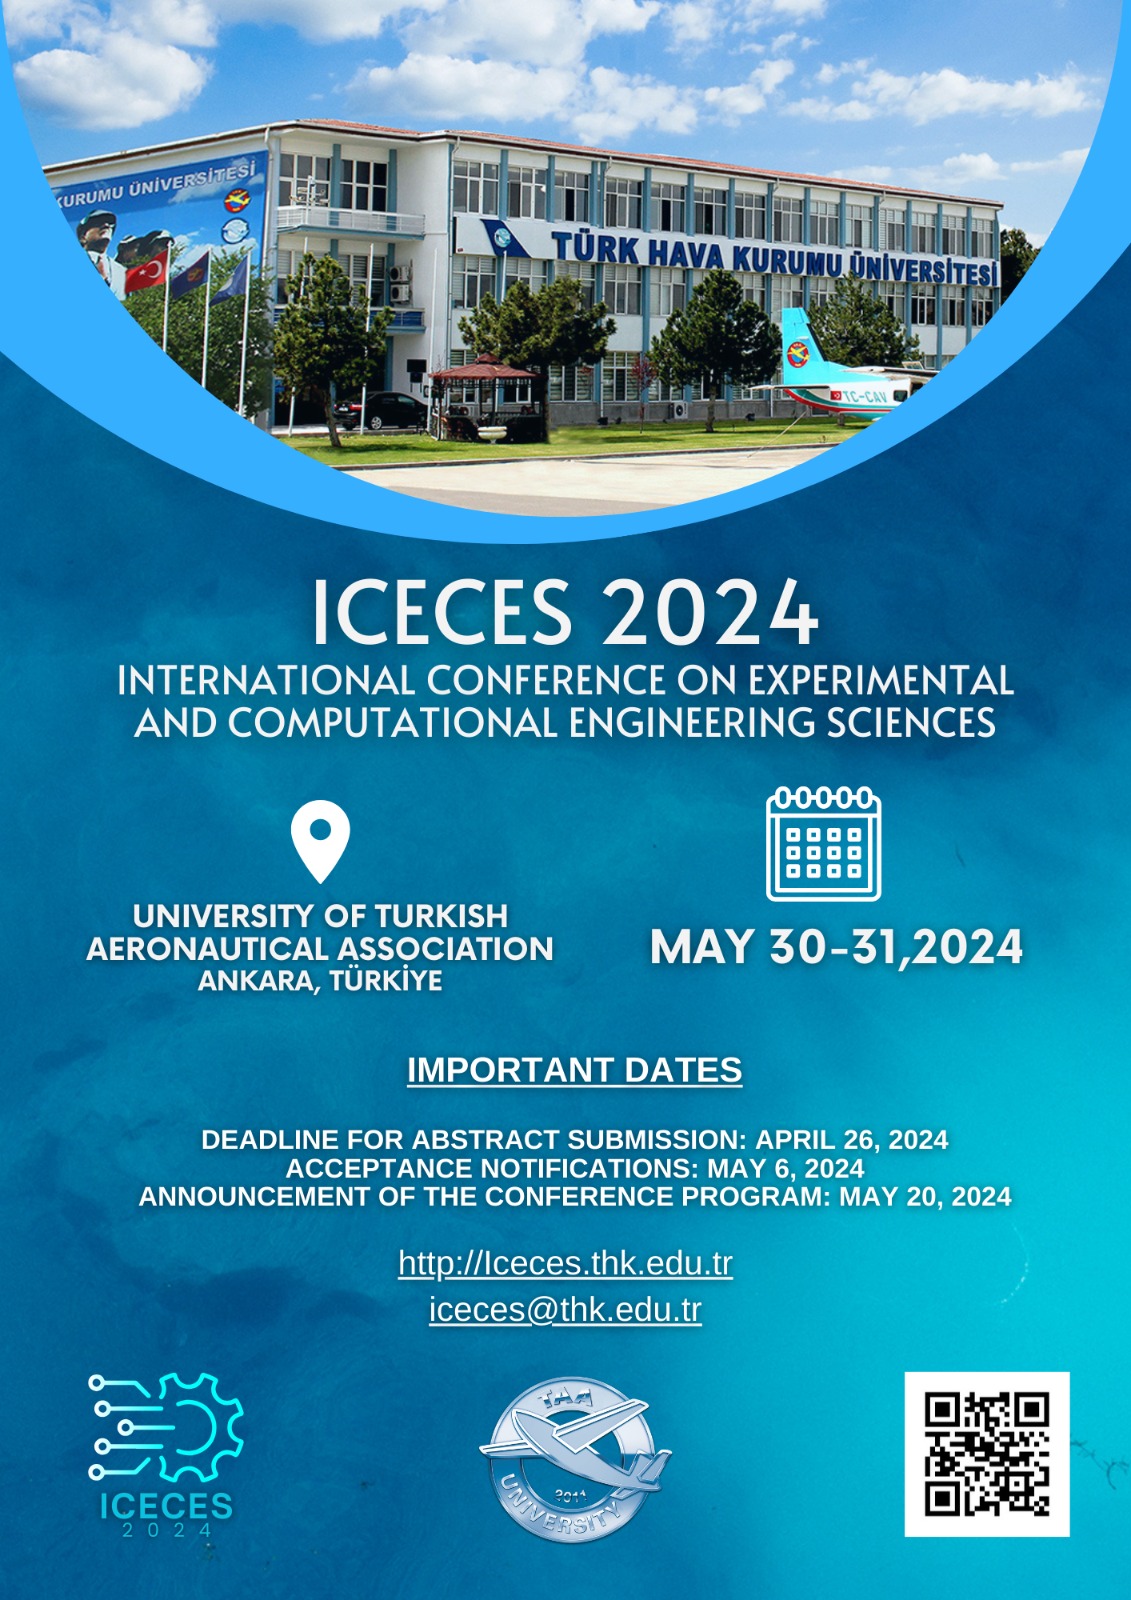 1st International Conference on Experimental and Computational Engineering Sciences - ICECES 2024